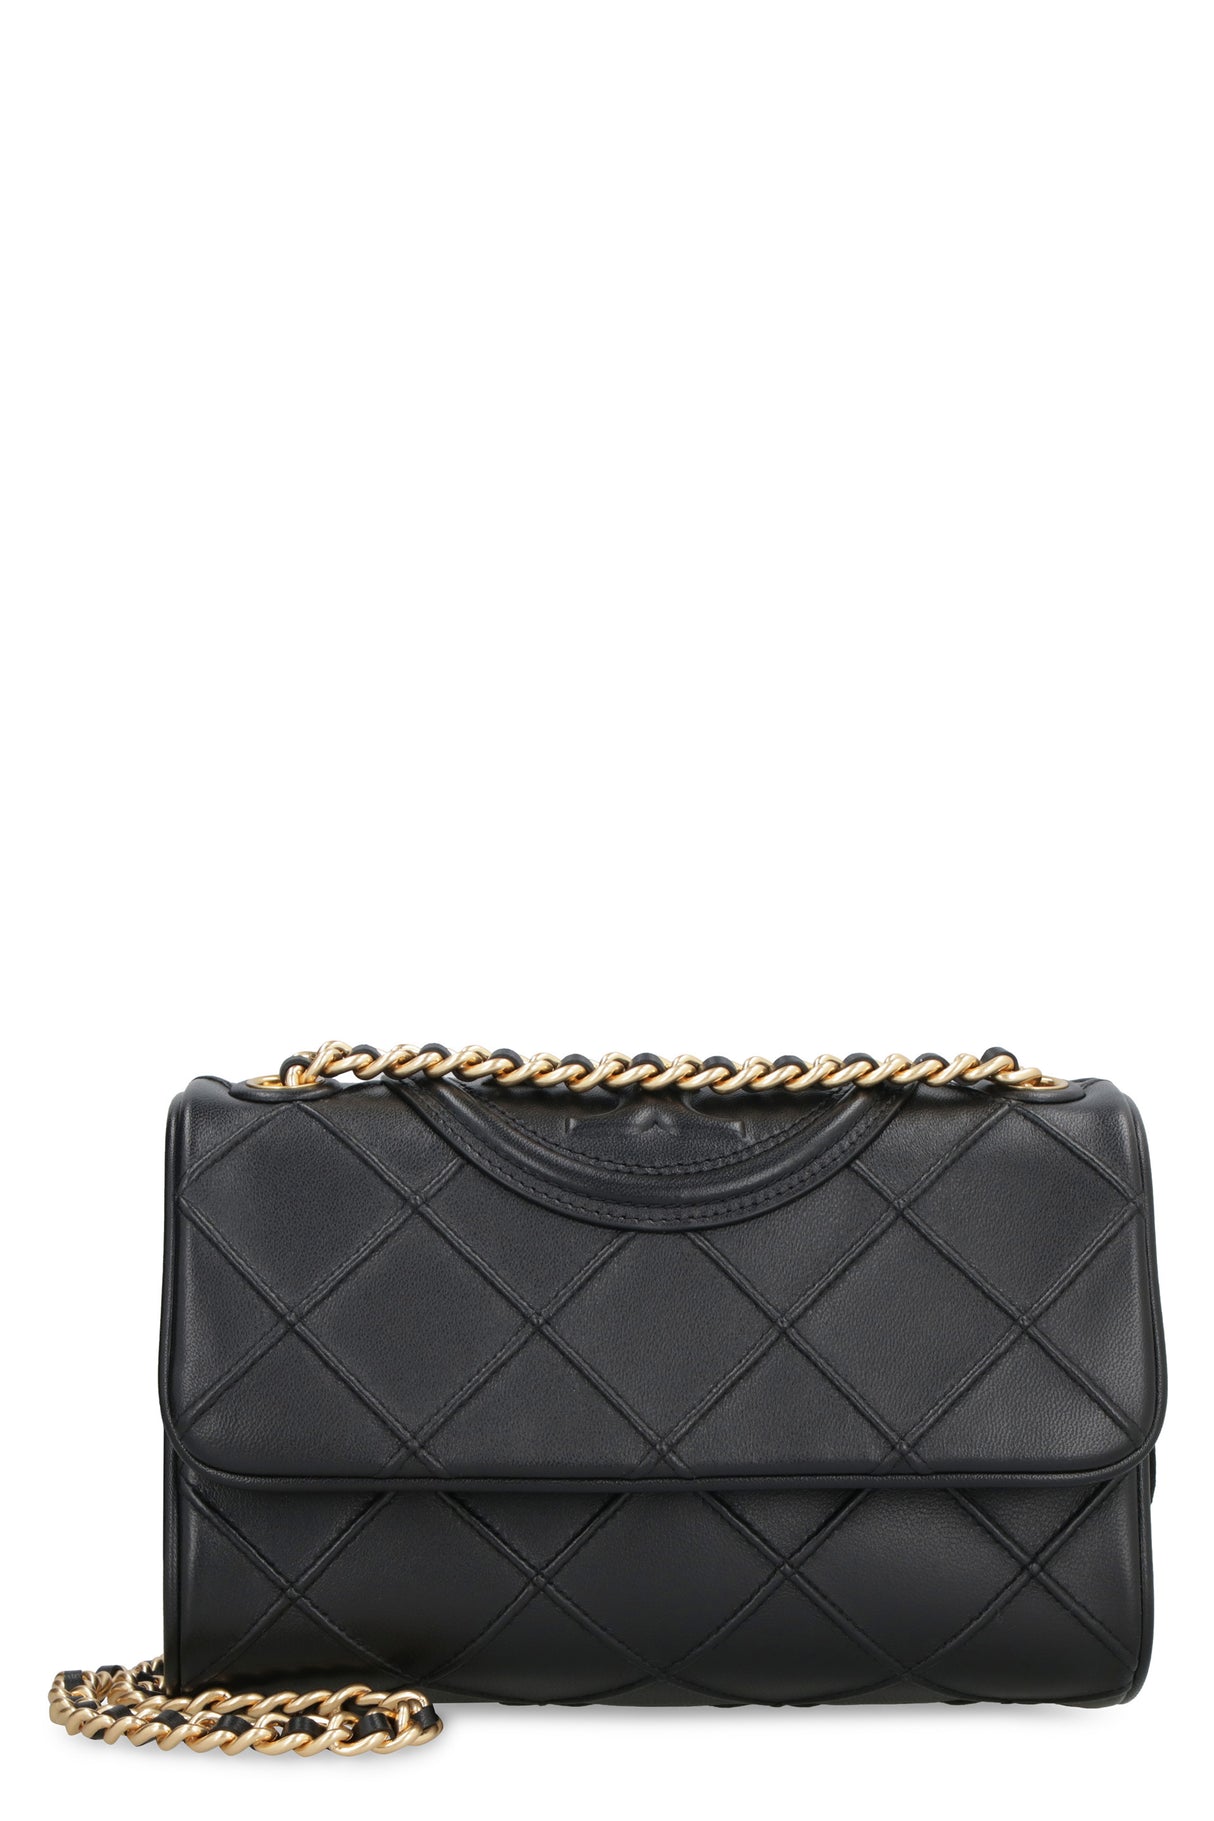 TORY BURCH Mini Fleming Quilted Leather Shoulder Bag in Black with Chain Strap, 16x22x9 cm